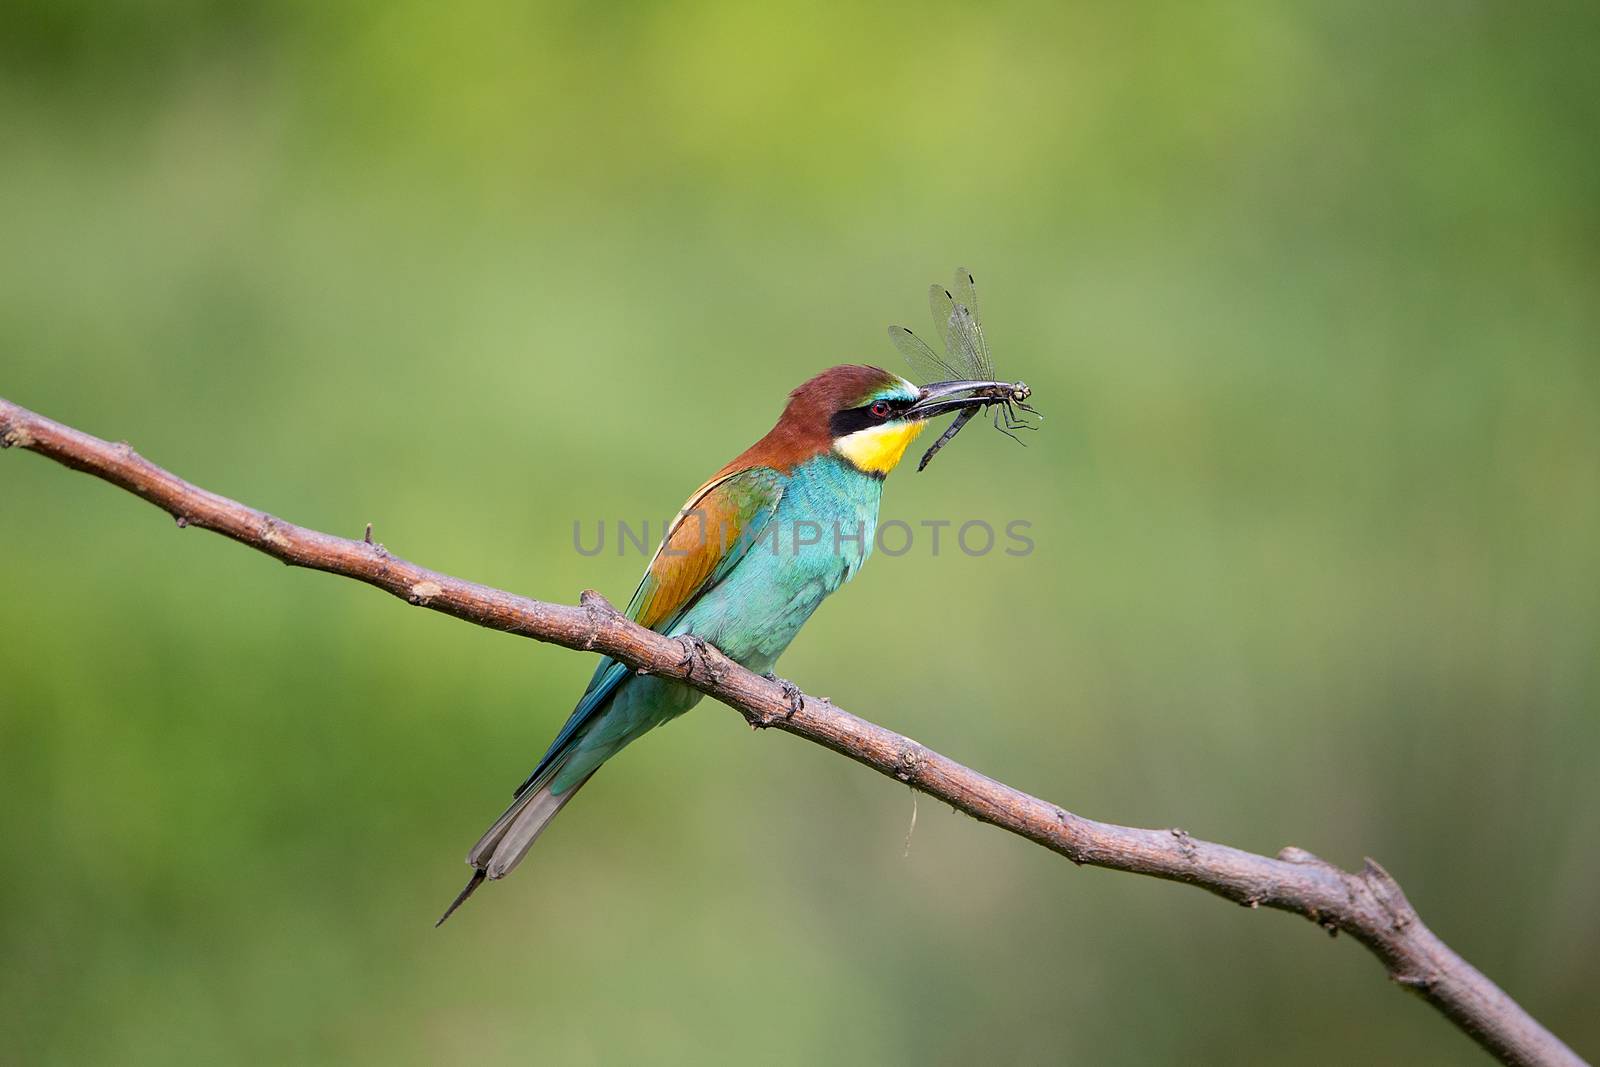 Bee-eater with dragonfly (Merops apiaster) by Tanja_g